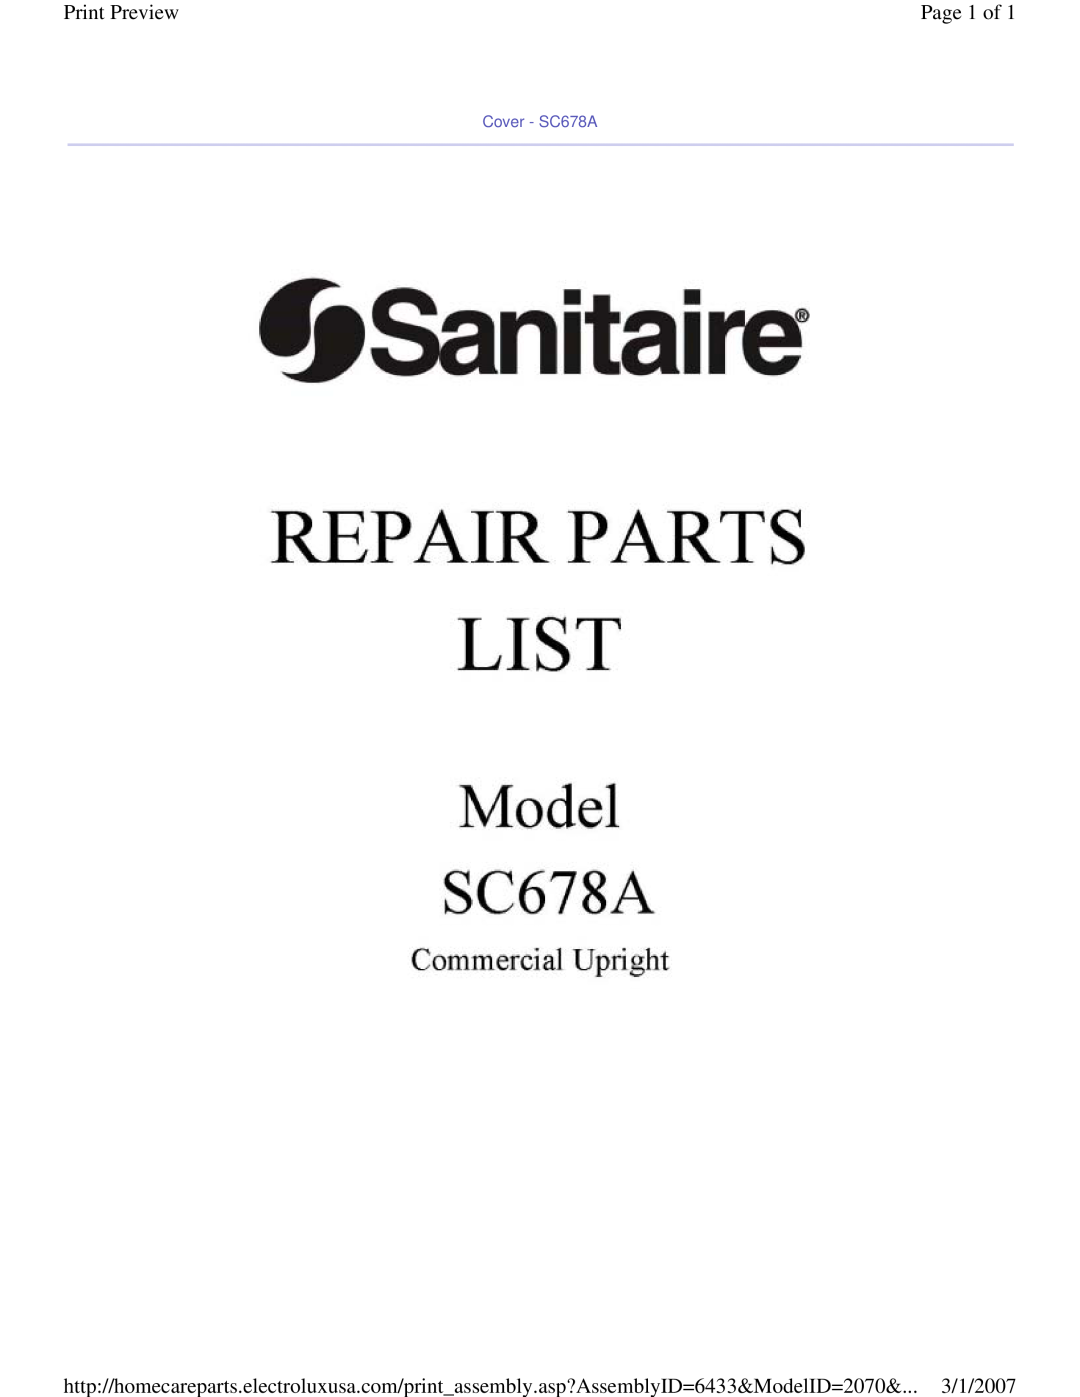 Sanitaire manual Print Preview, Page 1 of, Cover - SC678A 